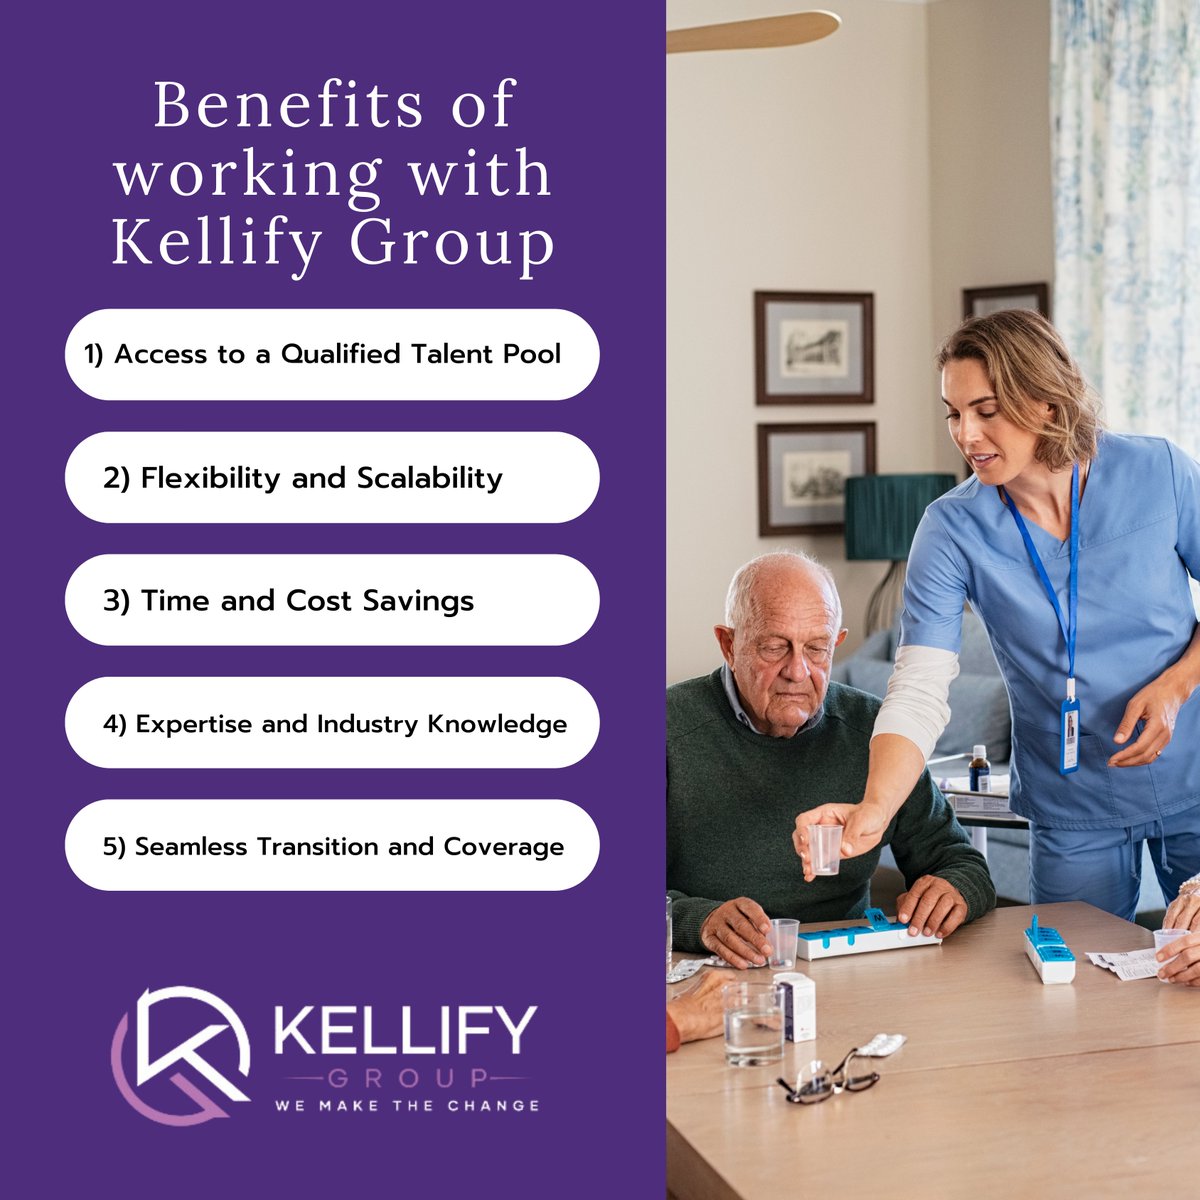 These are the benefits of working with us!
#HealthcareStaffing #TalentAcquisition #FlexibilityInStaffing #CostSavings #IndustryExpertise #SeamlessCoverage #QualityPatientCare #KellifyGroup